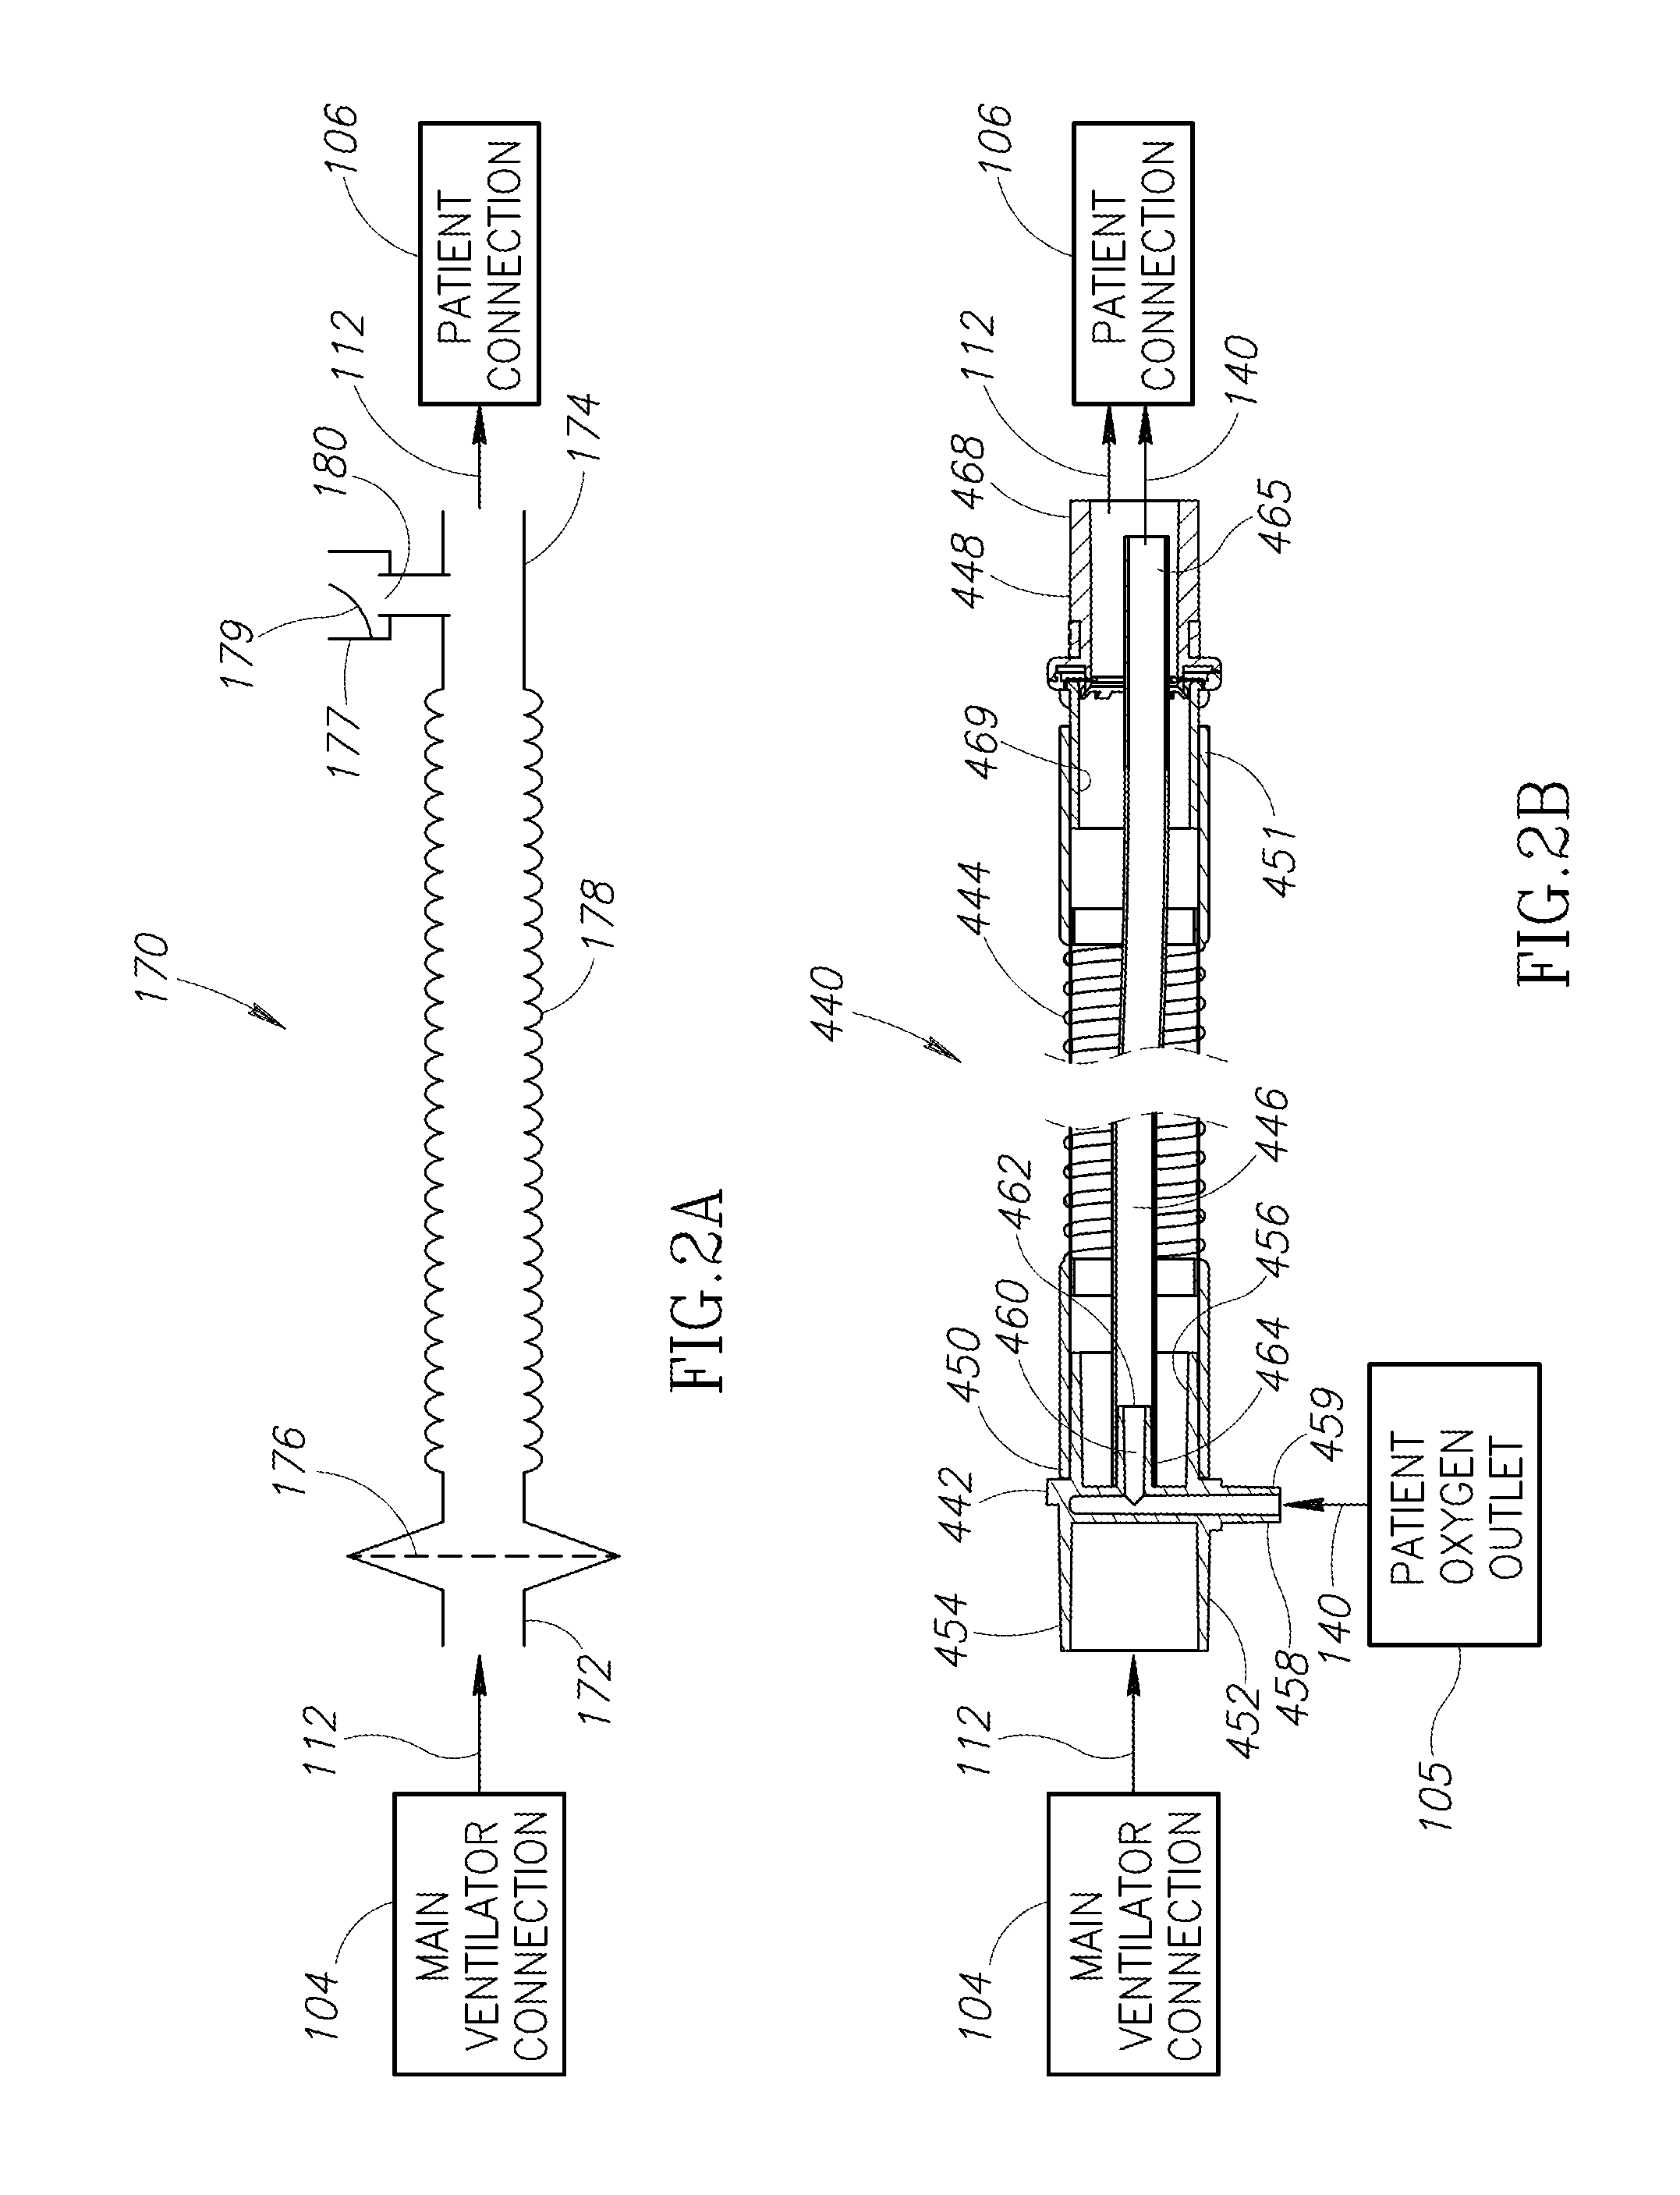 Ventilator with integrated oxygen production